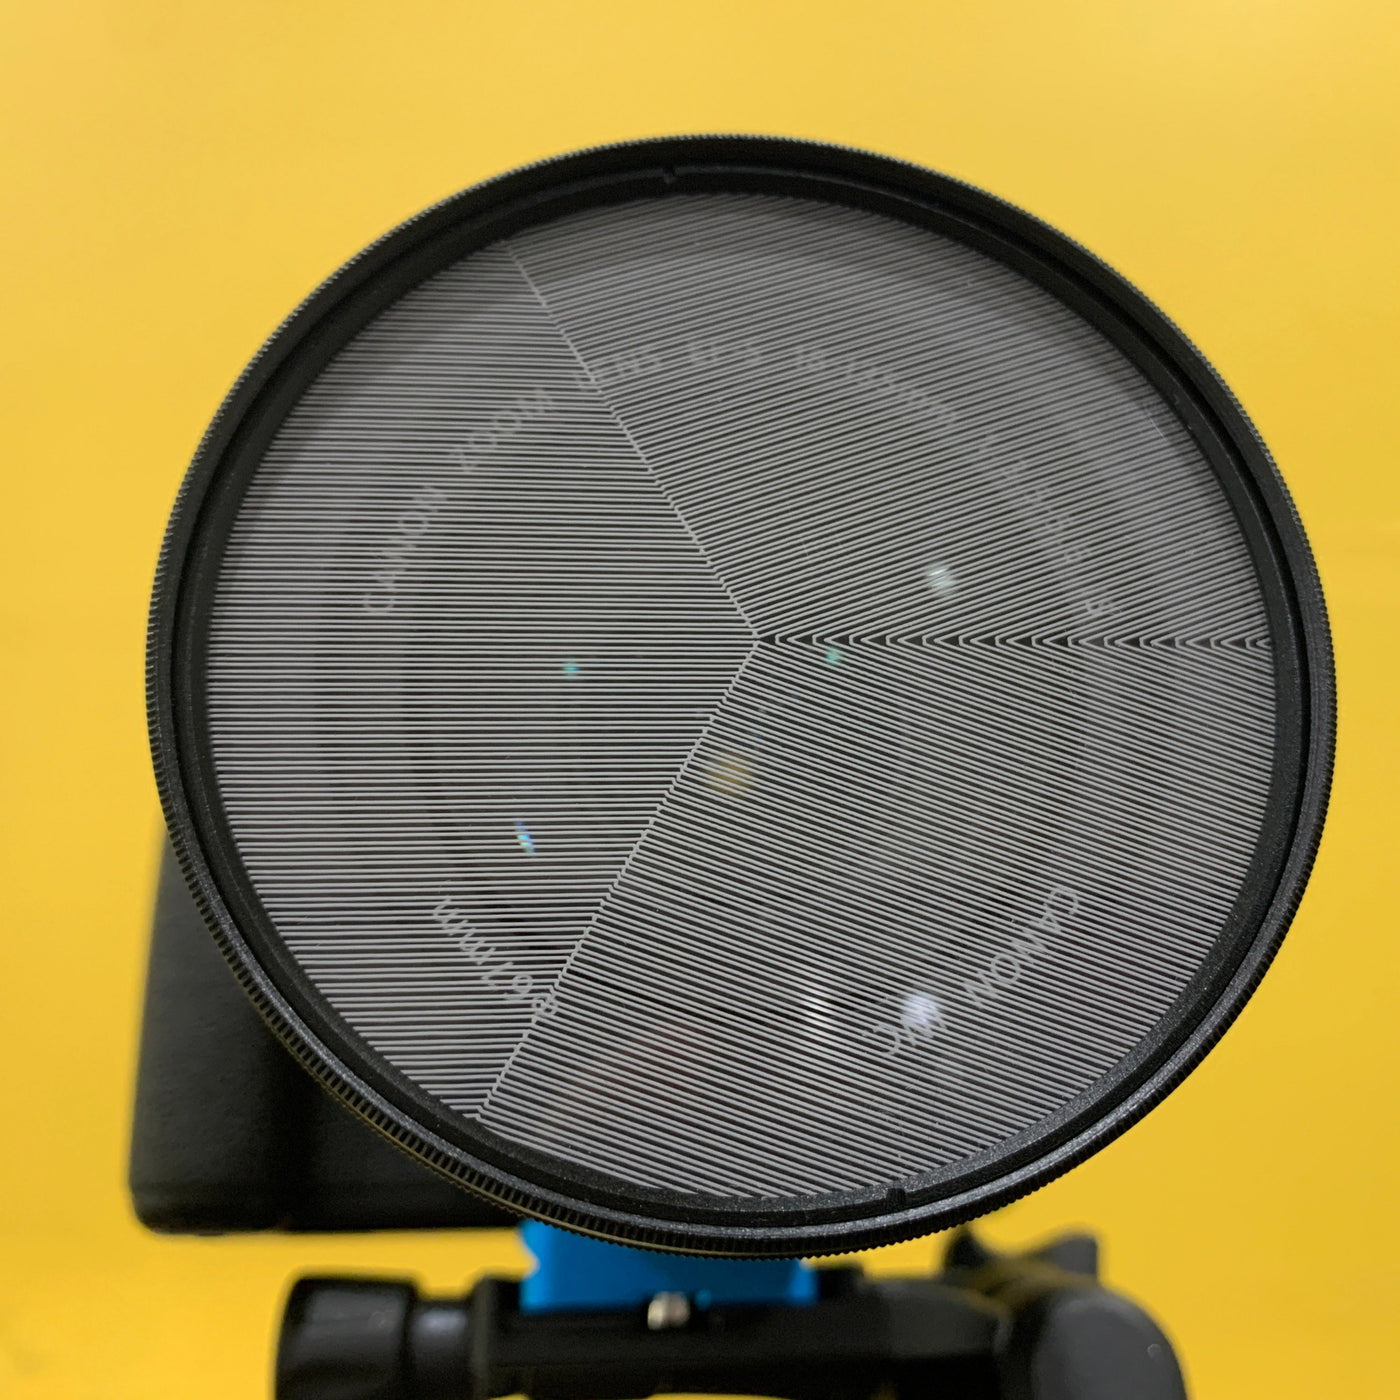 Easy Focus - Star Focus Filter  - Precise focus on the stars is Easy with it